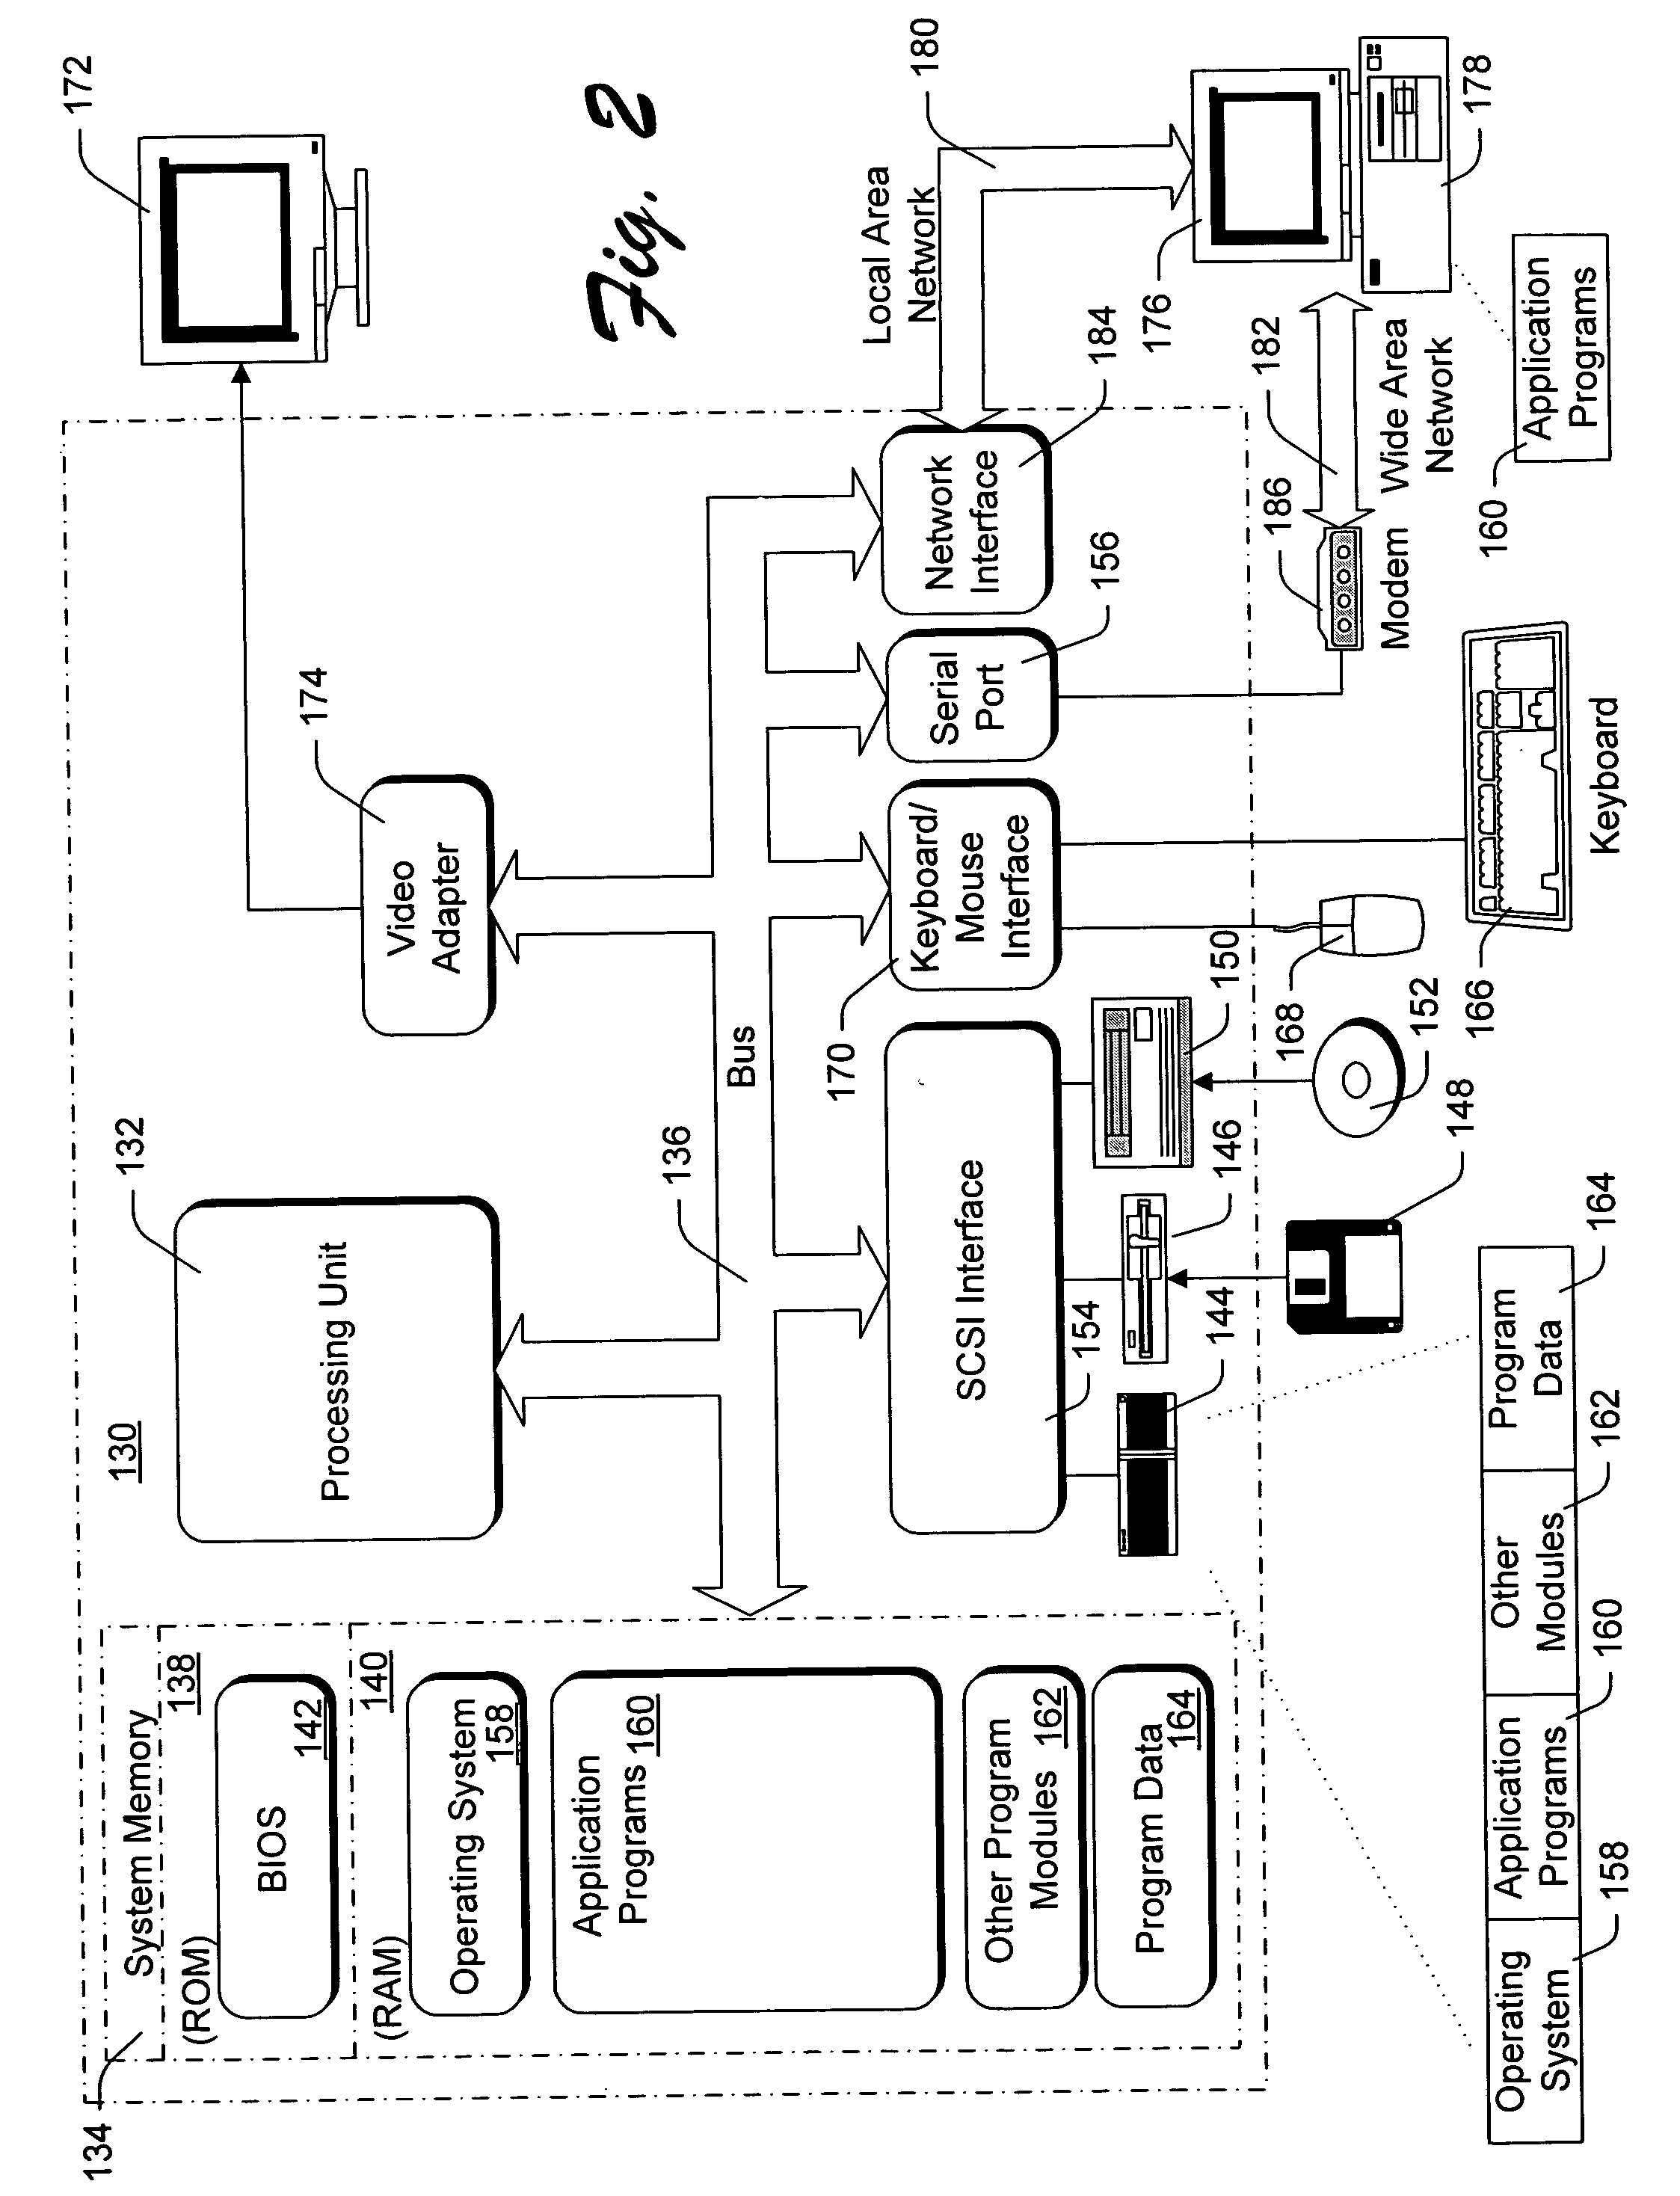 Multi-level skimming of multimedia content using playlists